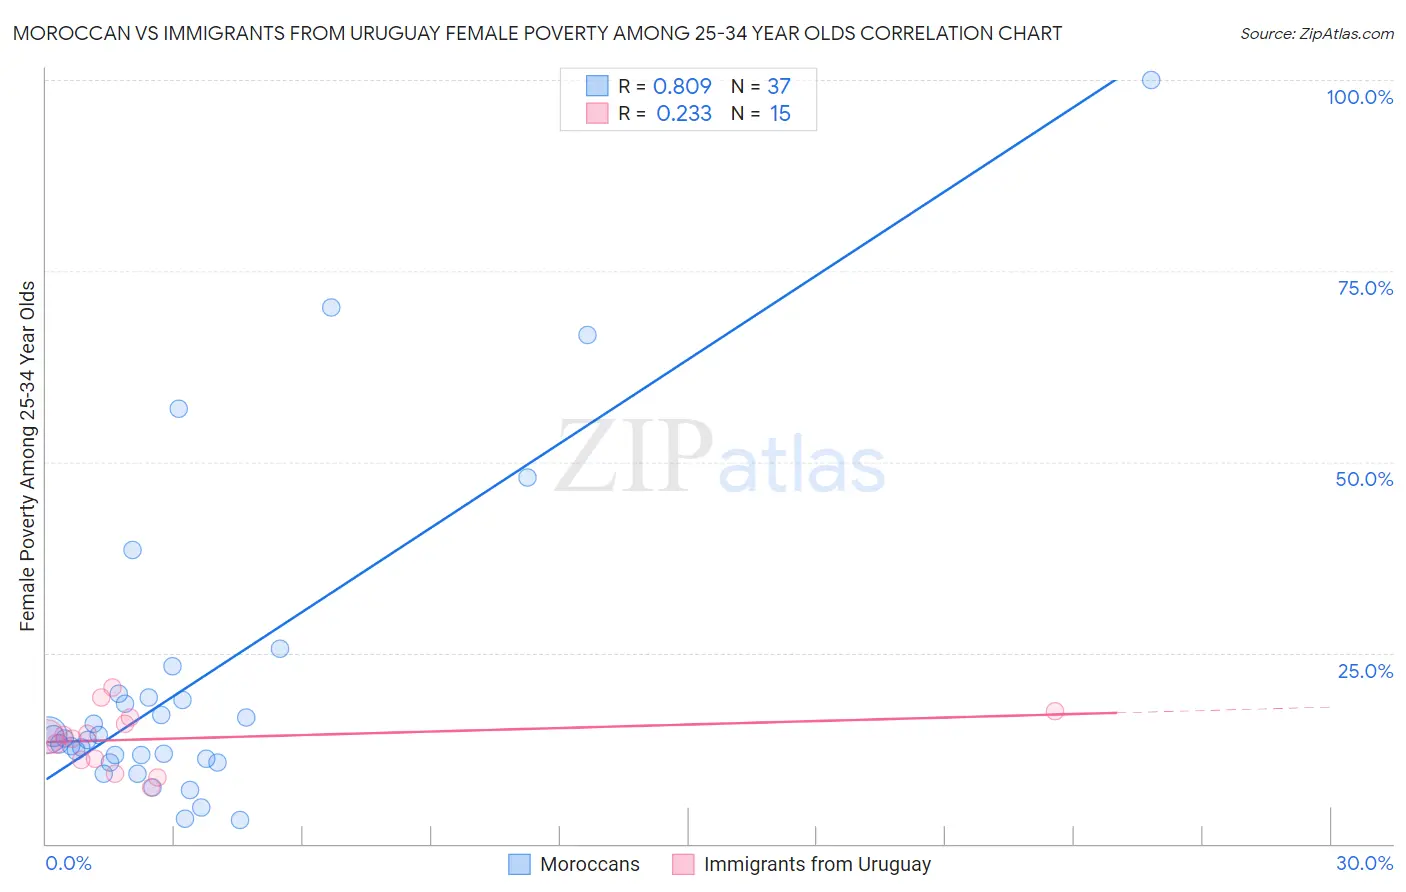 Moroccan vs Immigrants from Uruguay Female Poverty Among 25-34 Year Olds